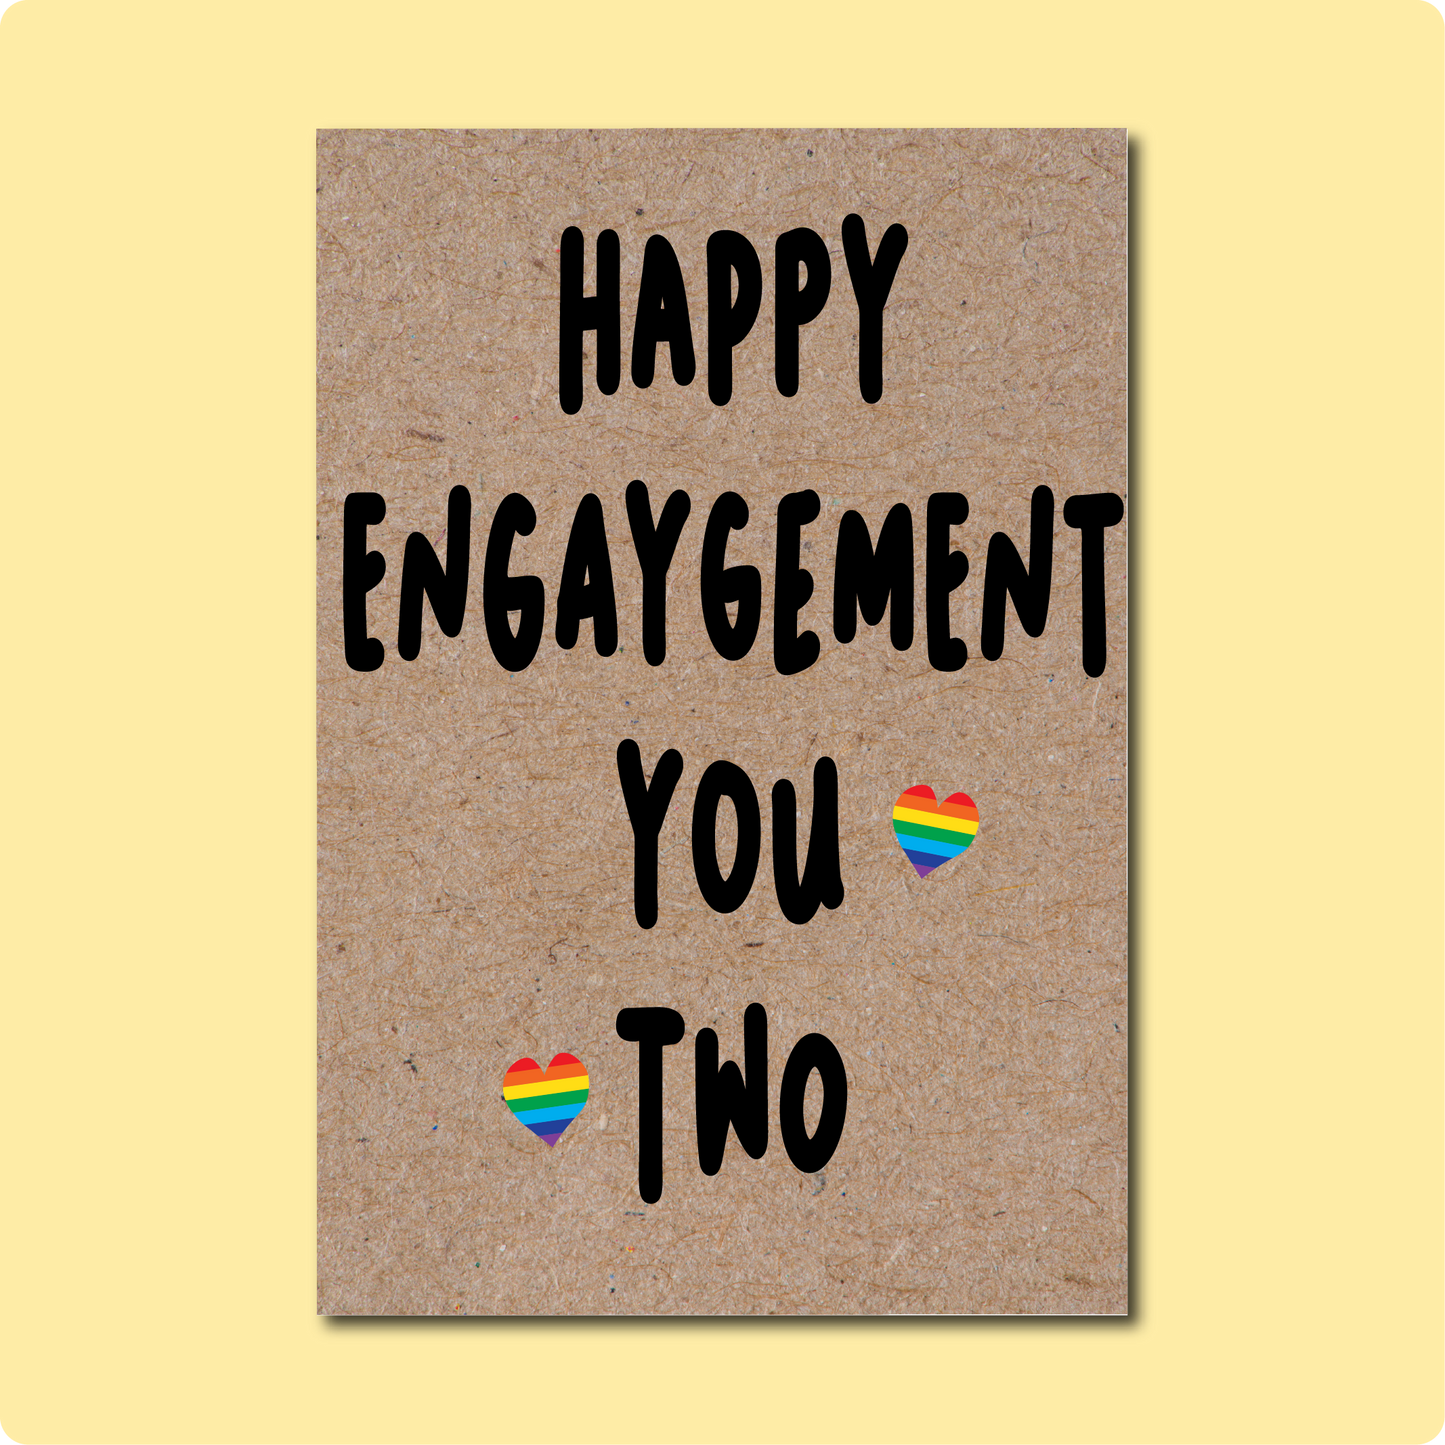 HAPPY ENGAYGEMENT Greeting Card